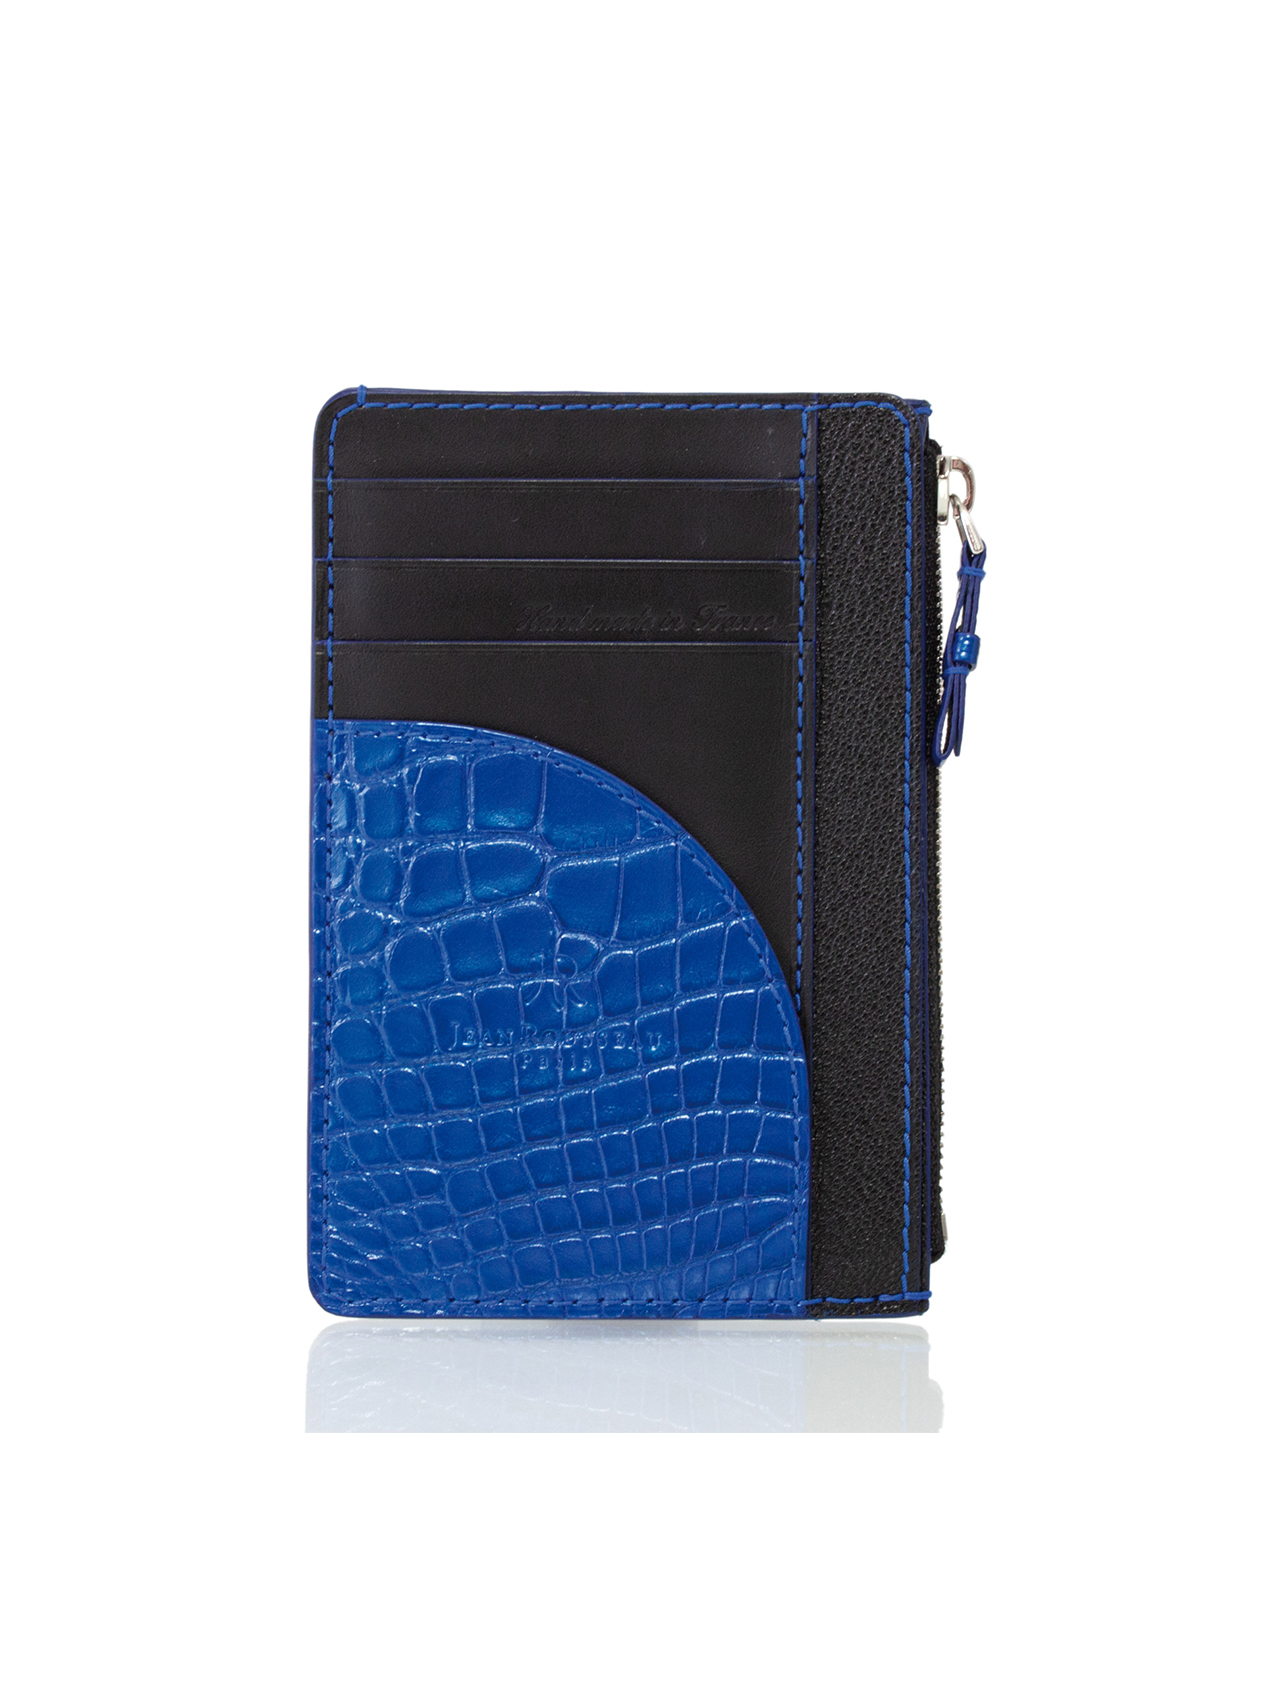 Double Layer Crocodile Pattern Accordion Style Card Holder Purse For Coins  And Cards